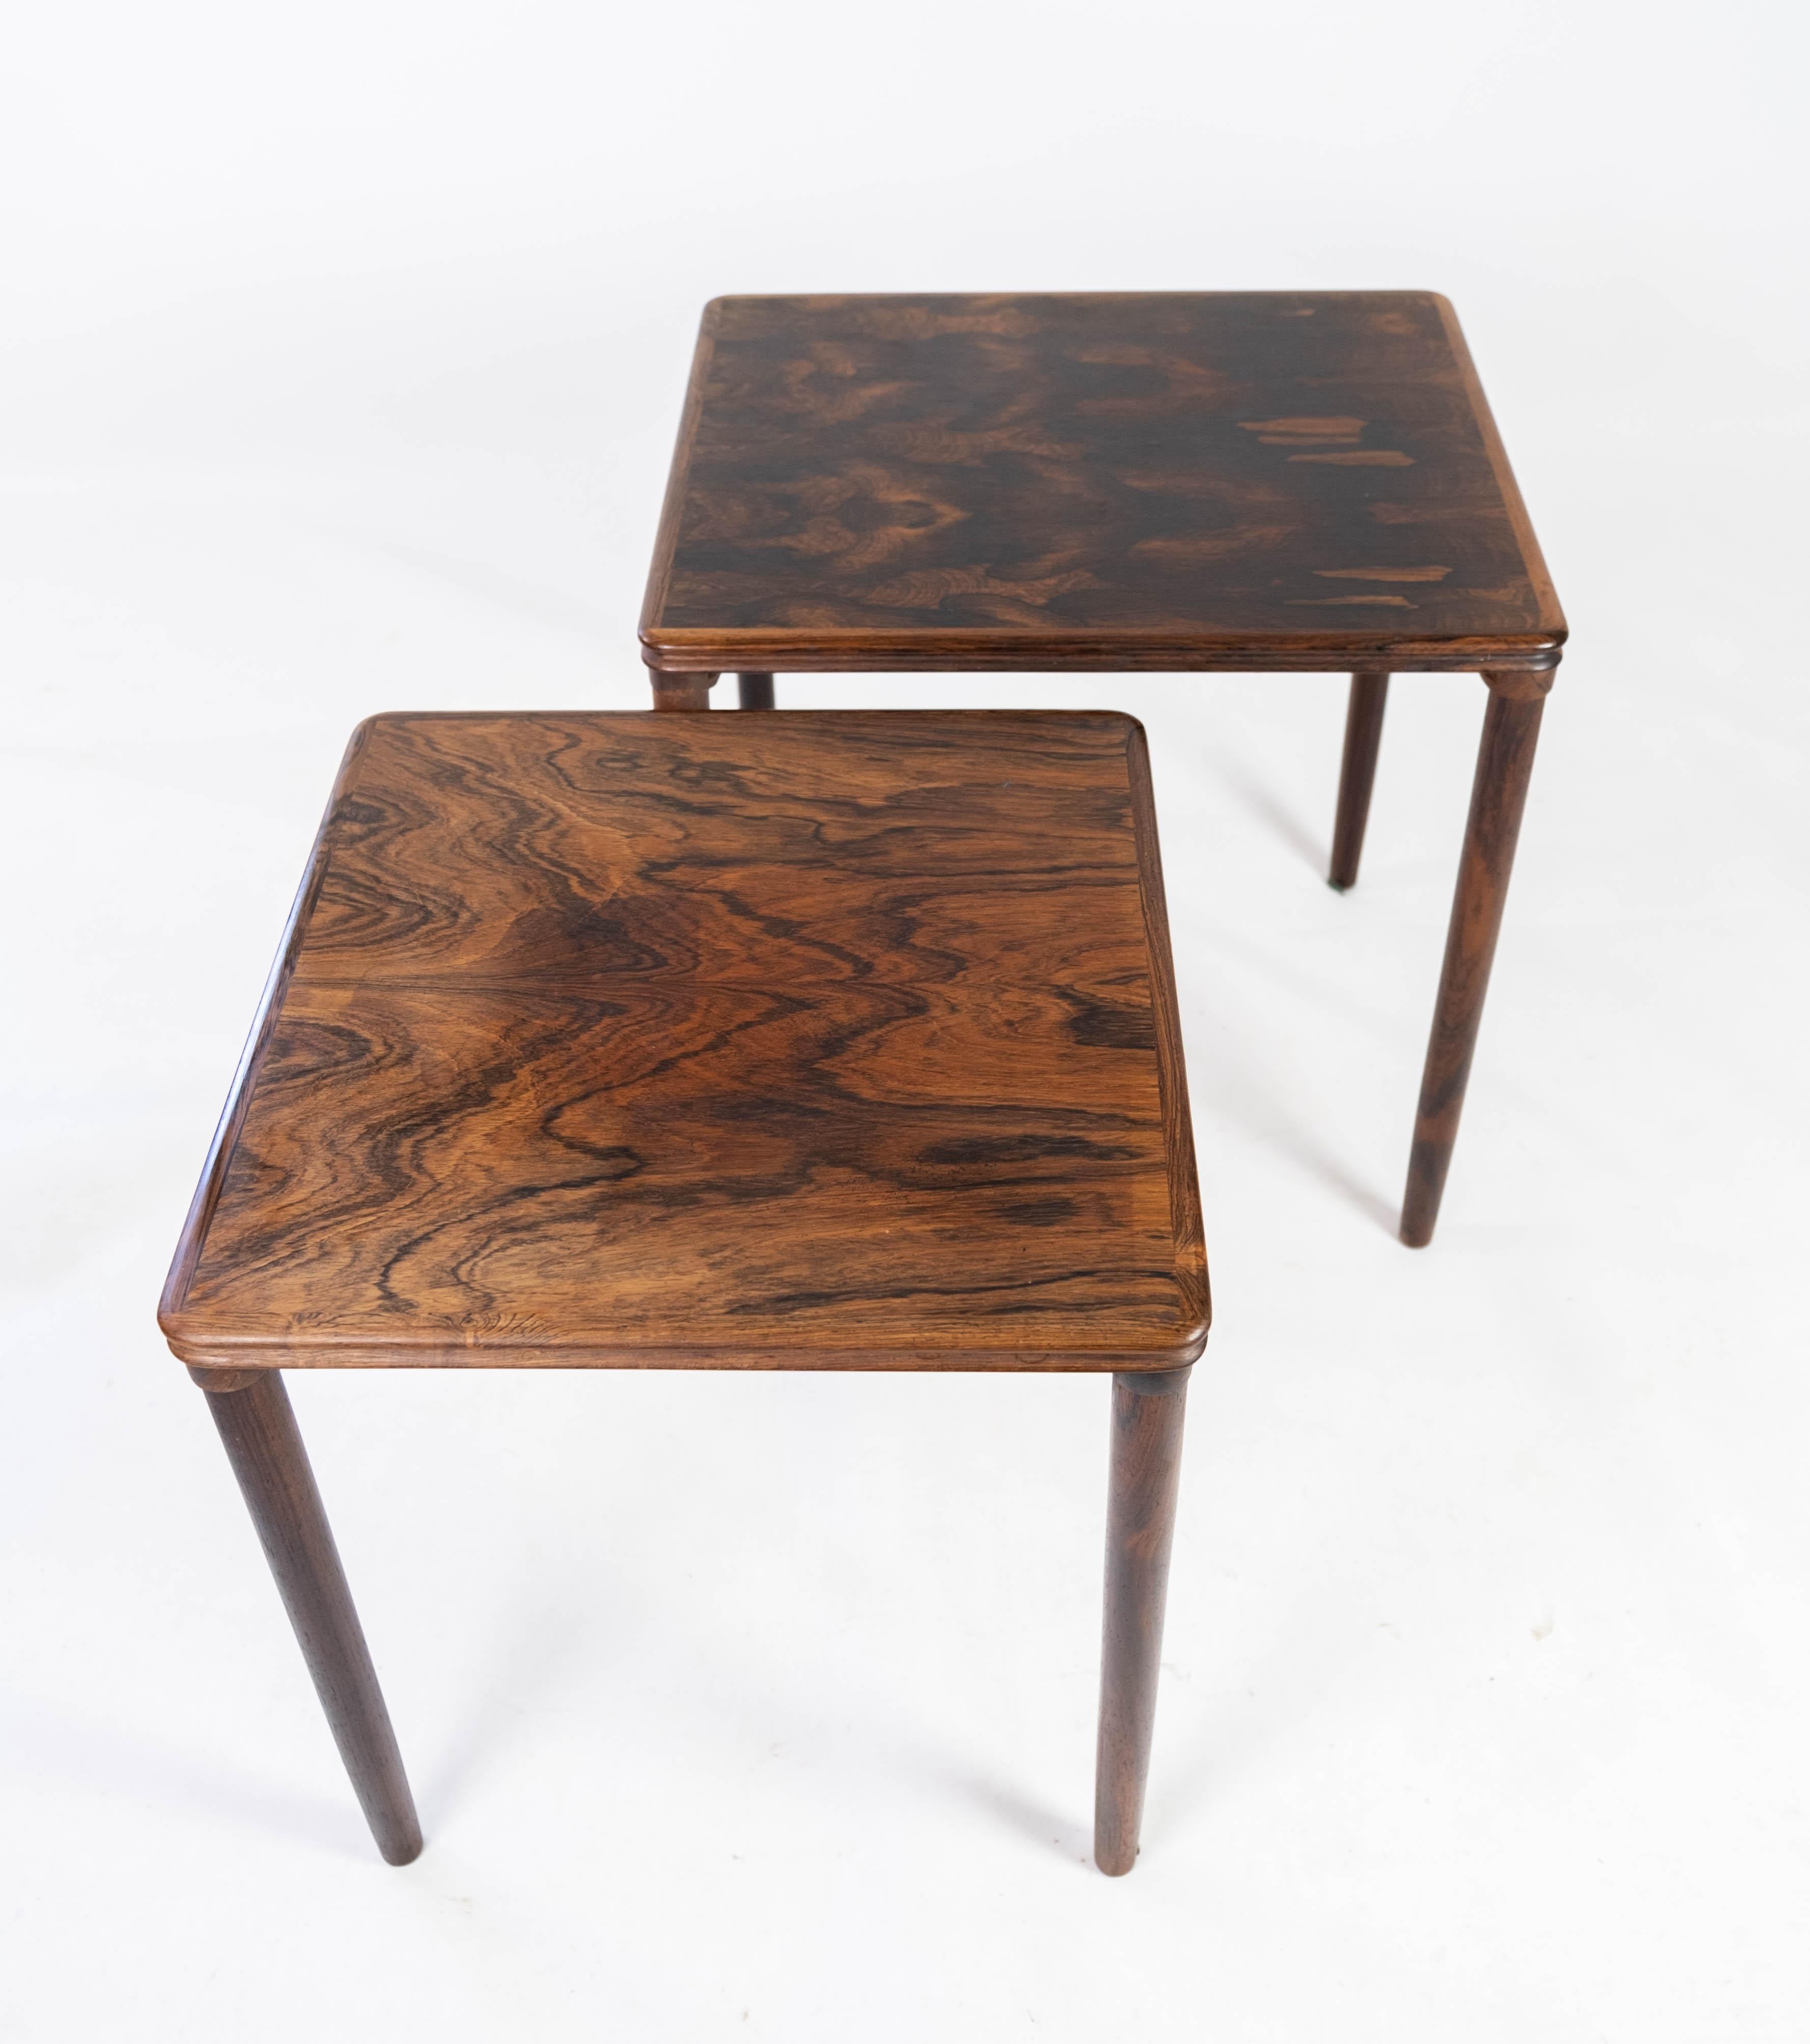 Nesting Tables in Rosewood of Danish Design from the 1960s For Sale 6